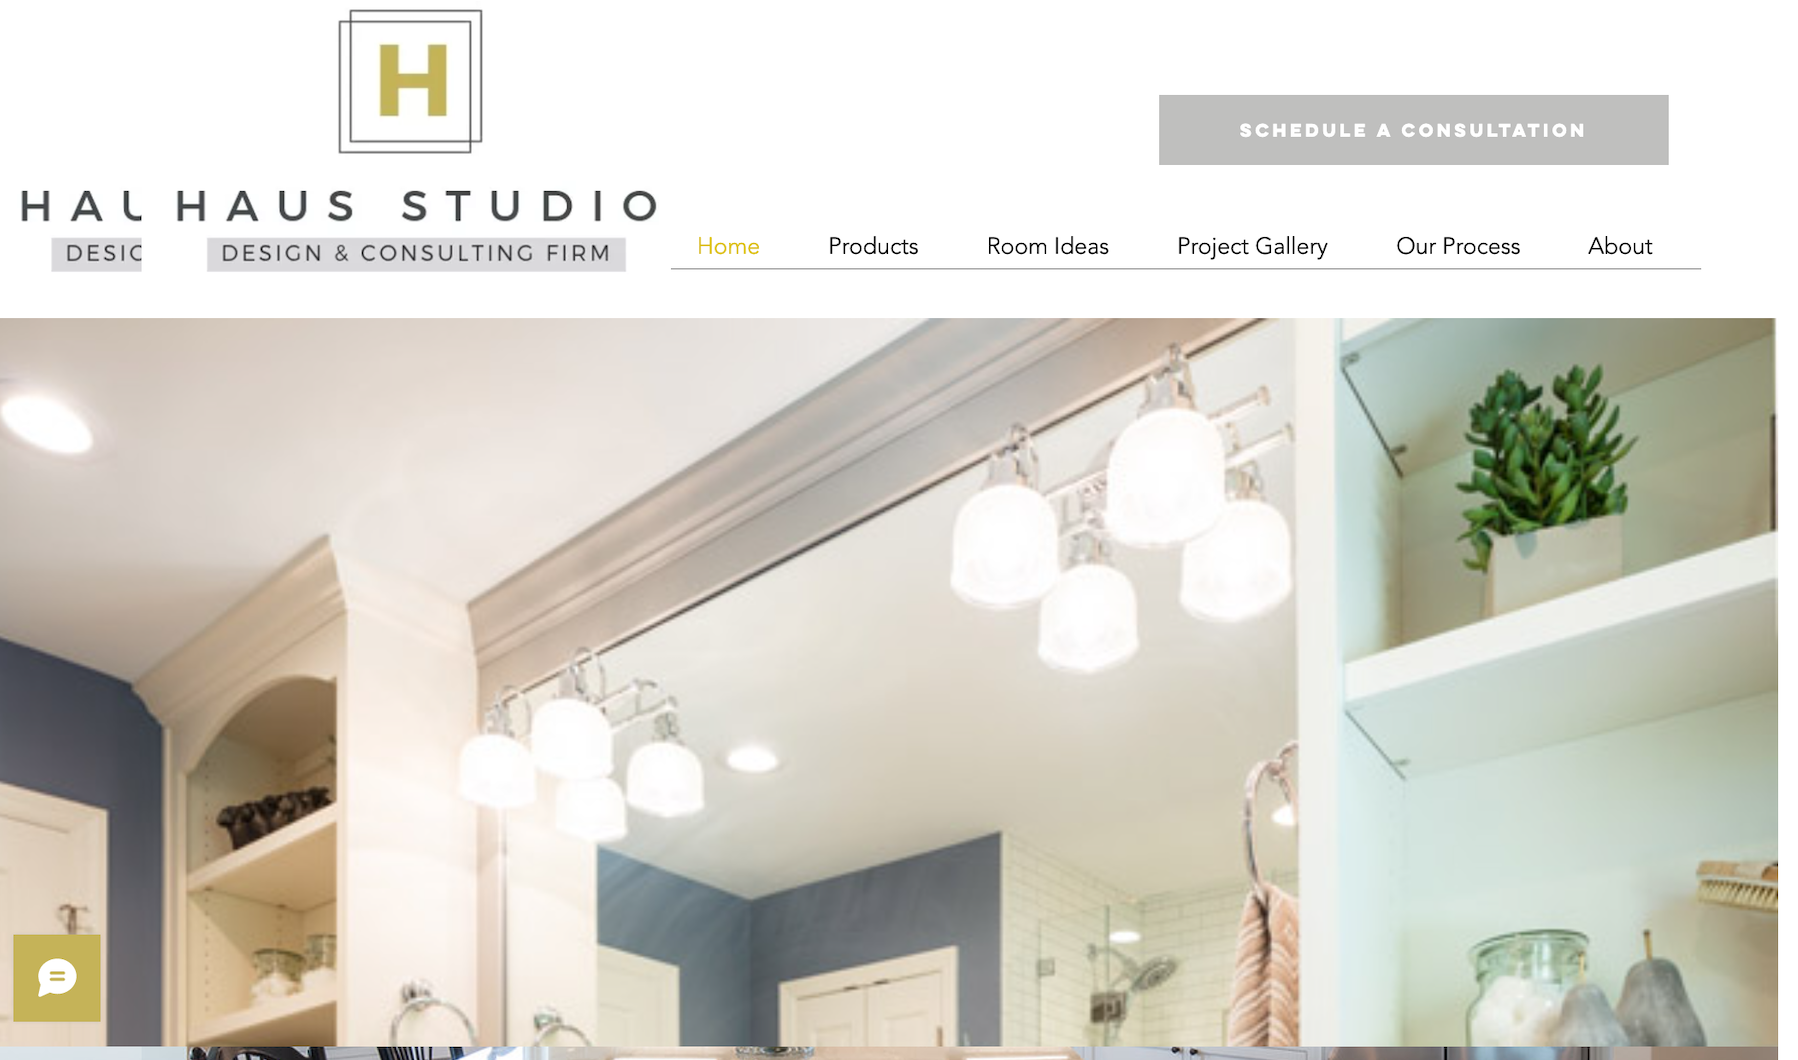 What the website looked like for Haus Studio before we redesigned it.